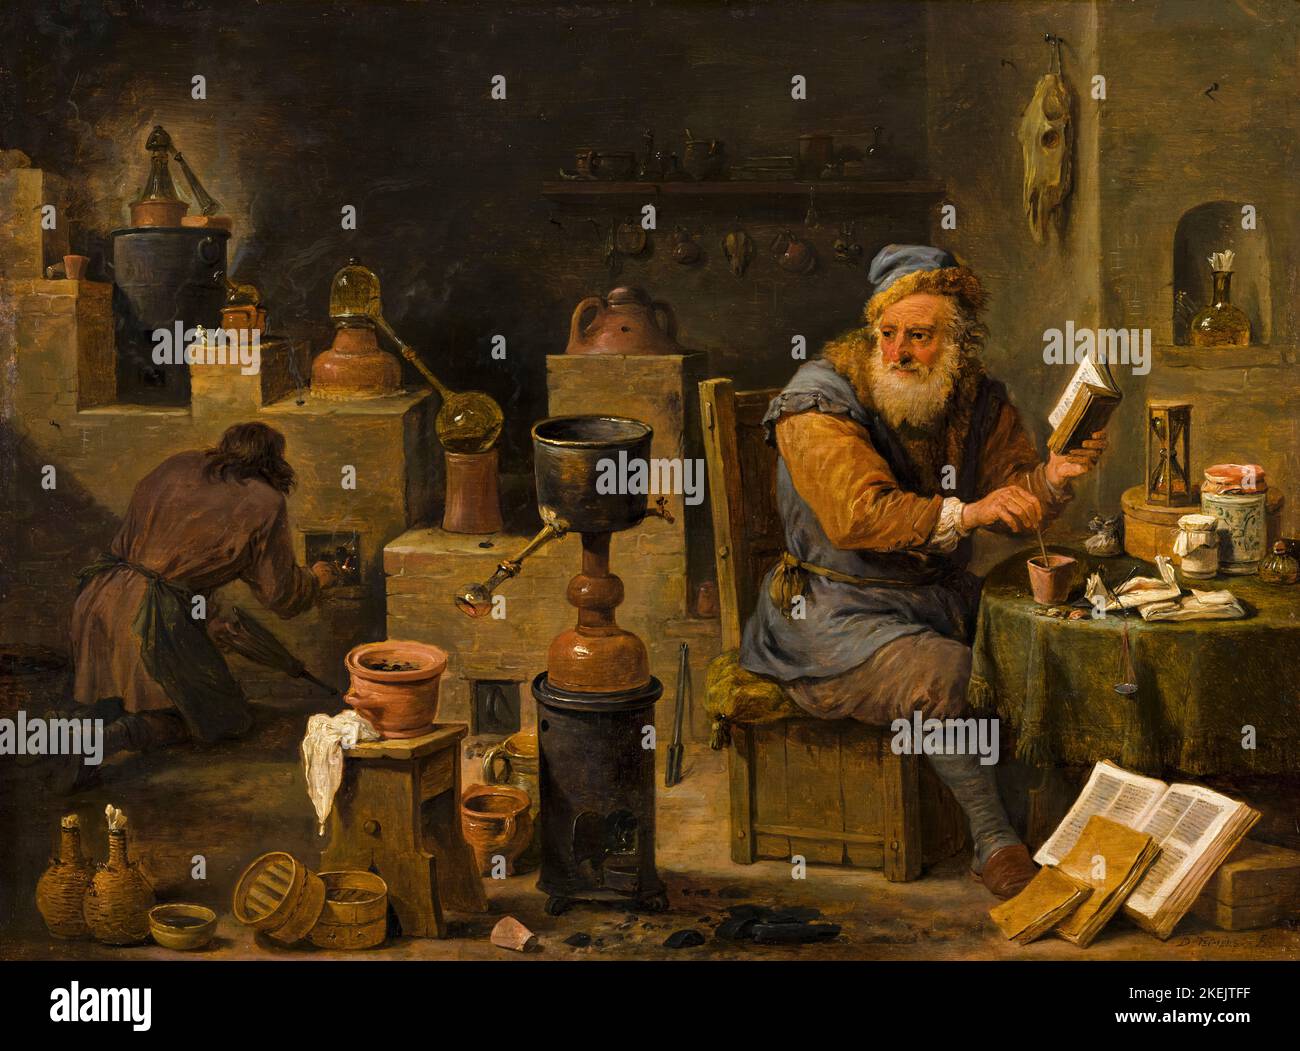 David Teniers the Younger, The Alchemist, painting in oil on panel, 1650 Stock Photo